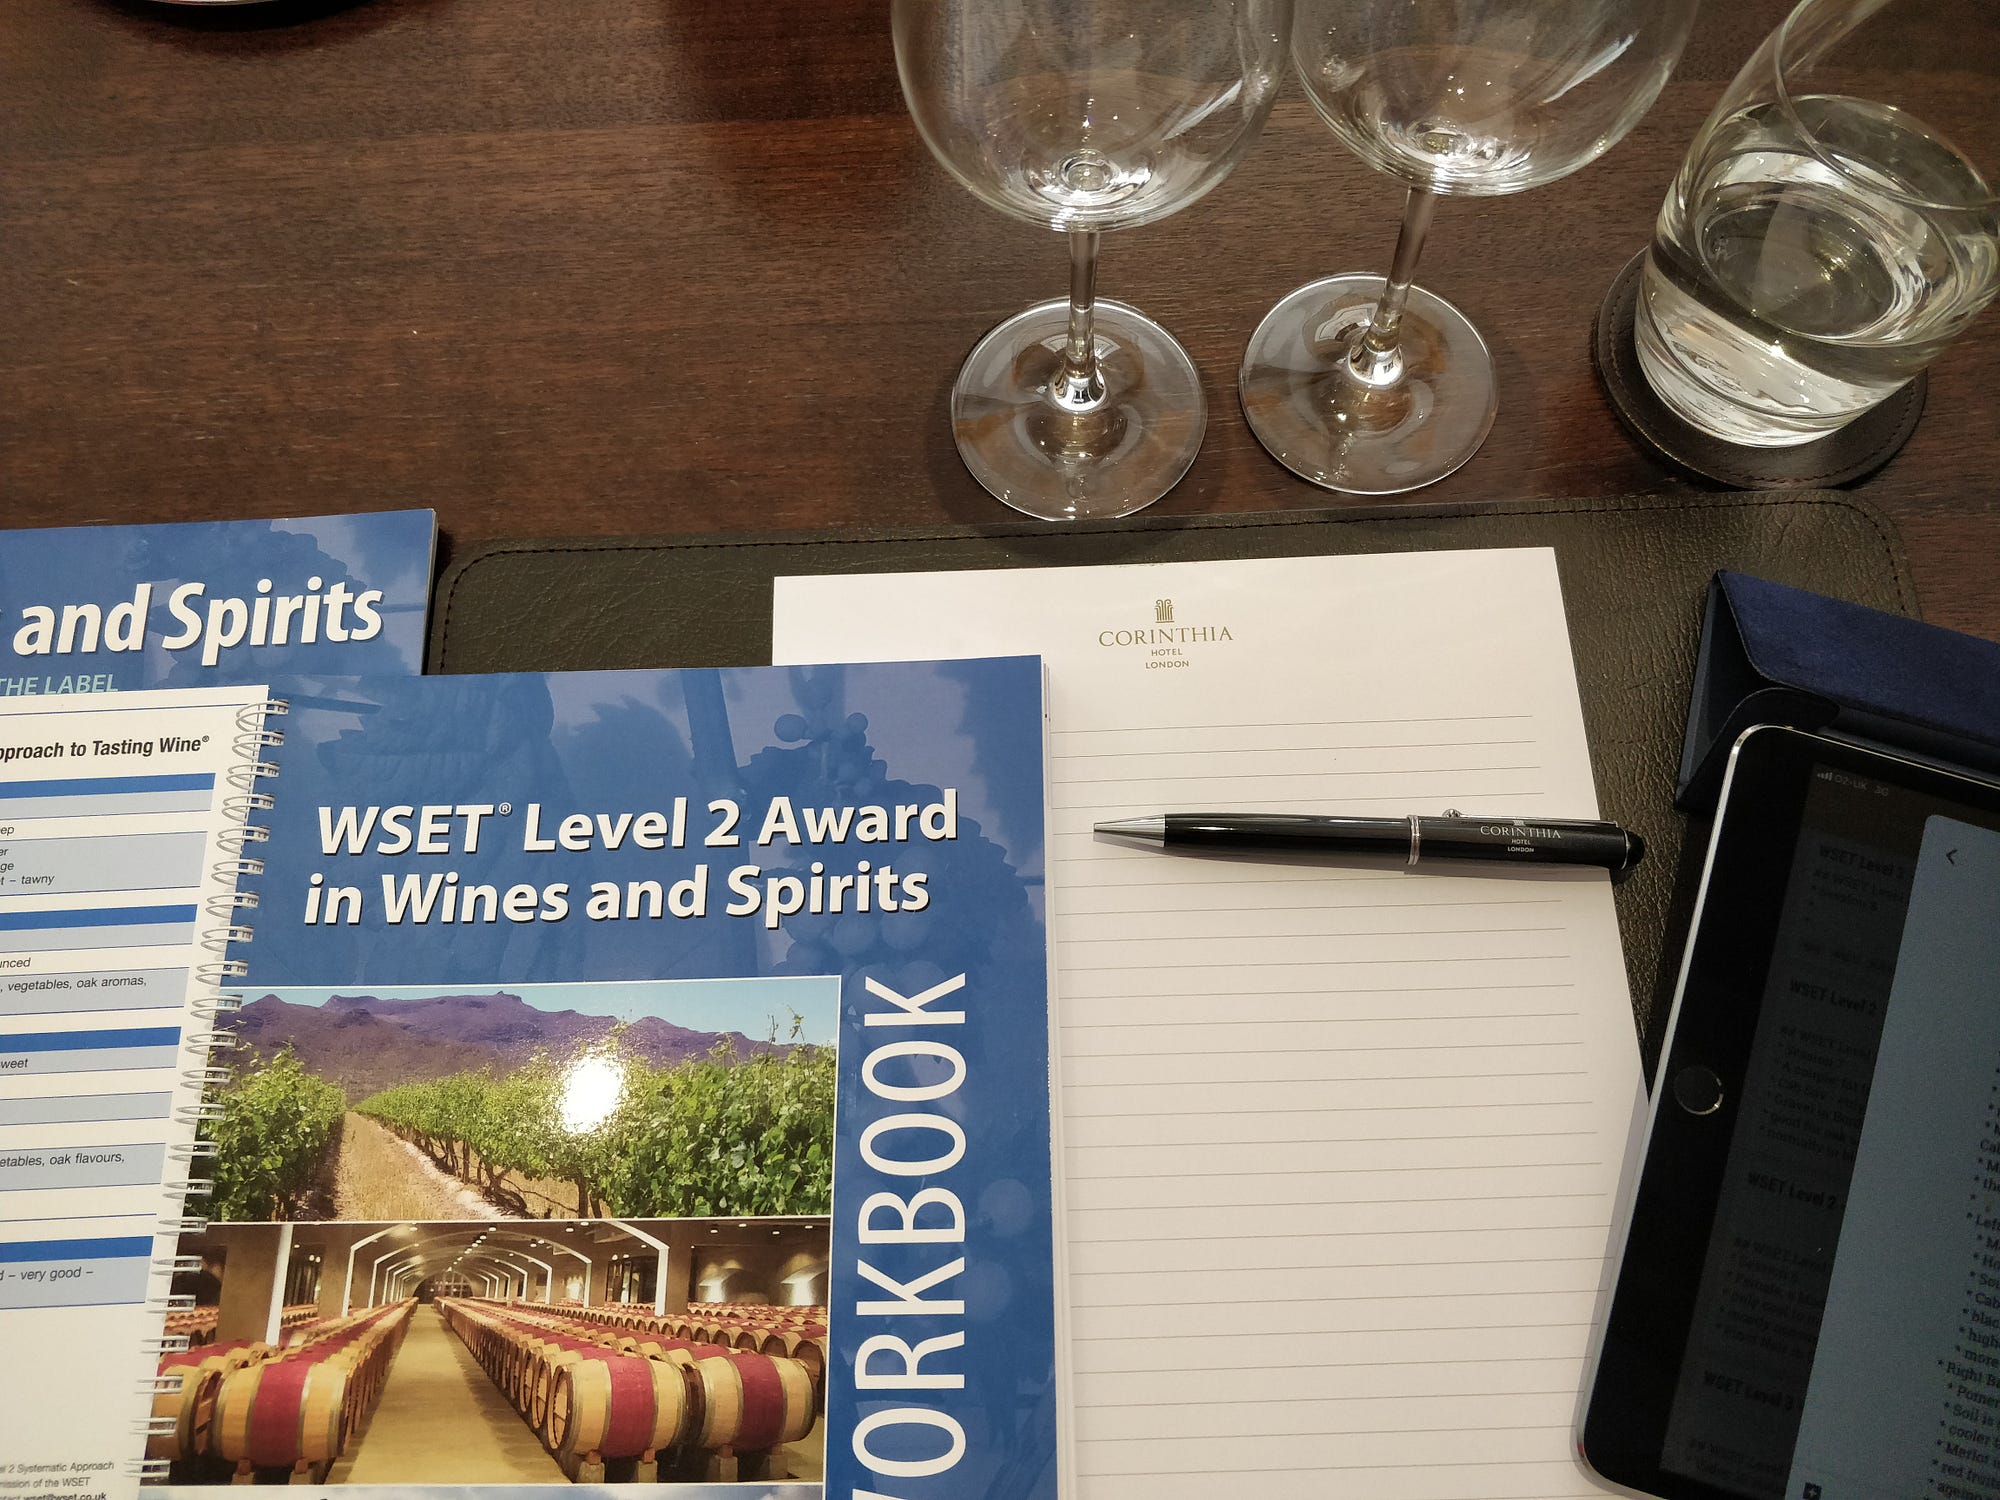 Got my WSET Level 2 Certificate finally - Passed with Distinction